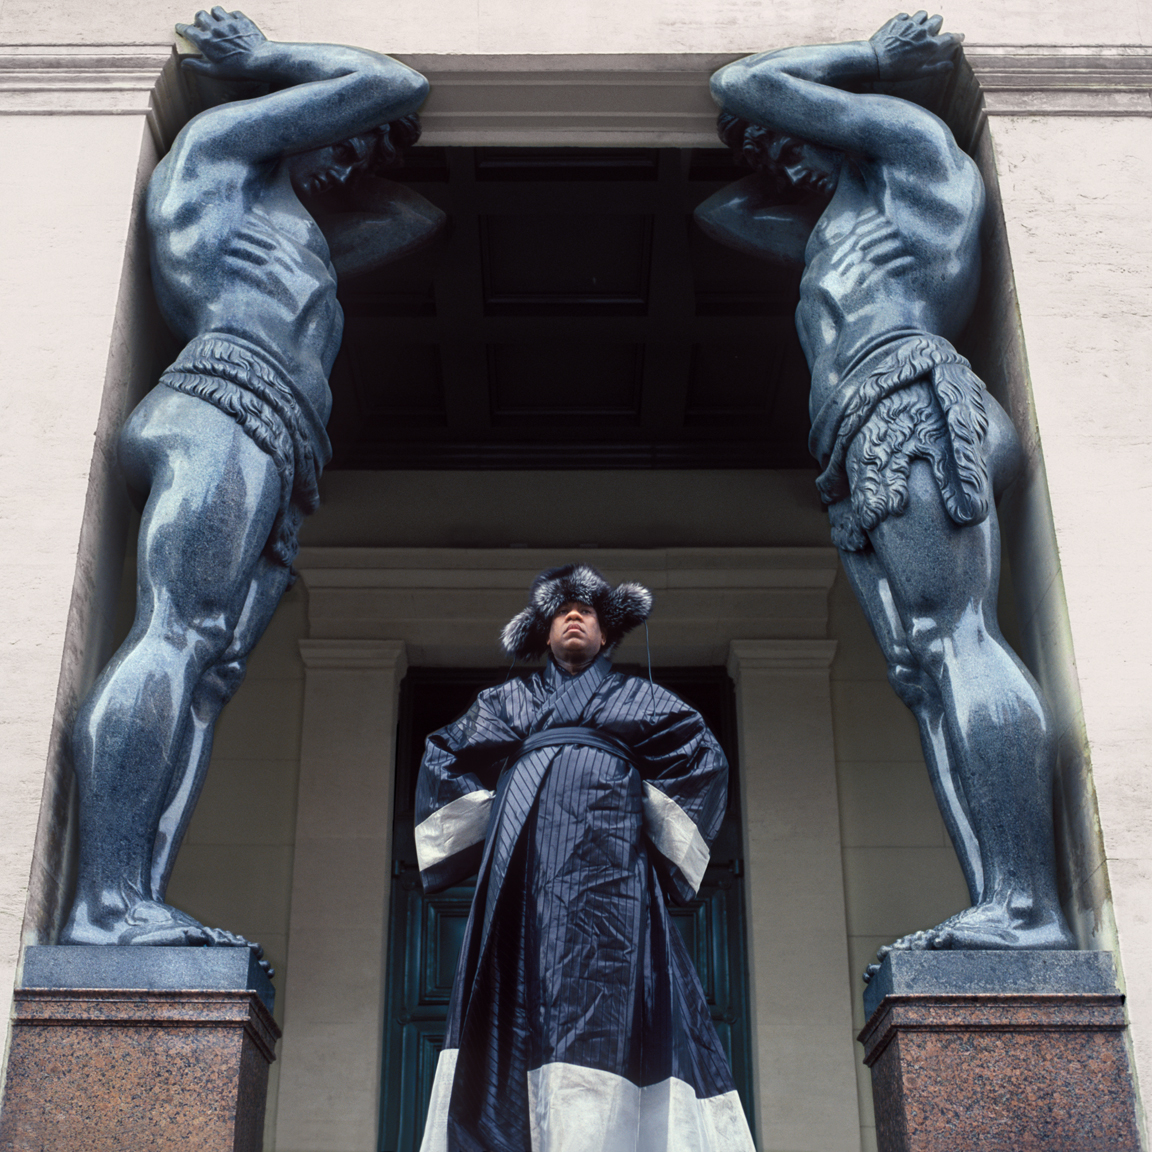 Andre Leon Talley, Vogue magazine's editor at large on his visit to Russia. Flanked by two giant Atlases, ALT stands at the side entrance to Hermitage Museum, St. Petersburg. Andre Leon Talley's outfit consists of kimono by Christian Dior Haute Couture and fur hat by Prada.